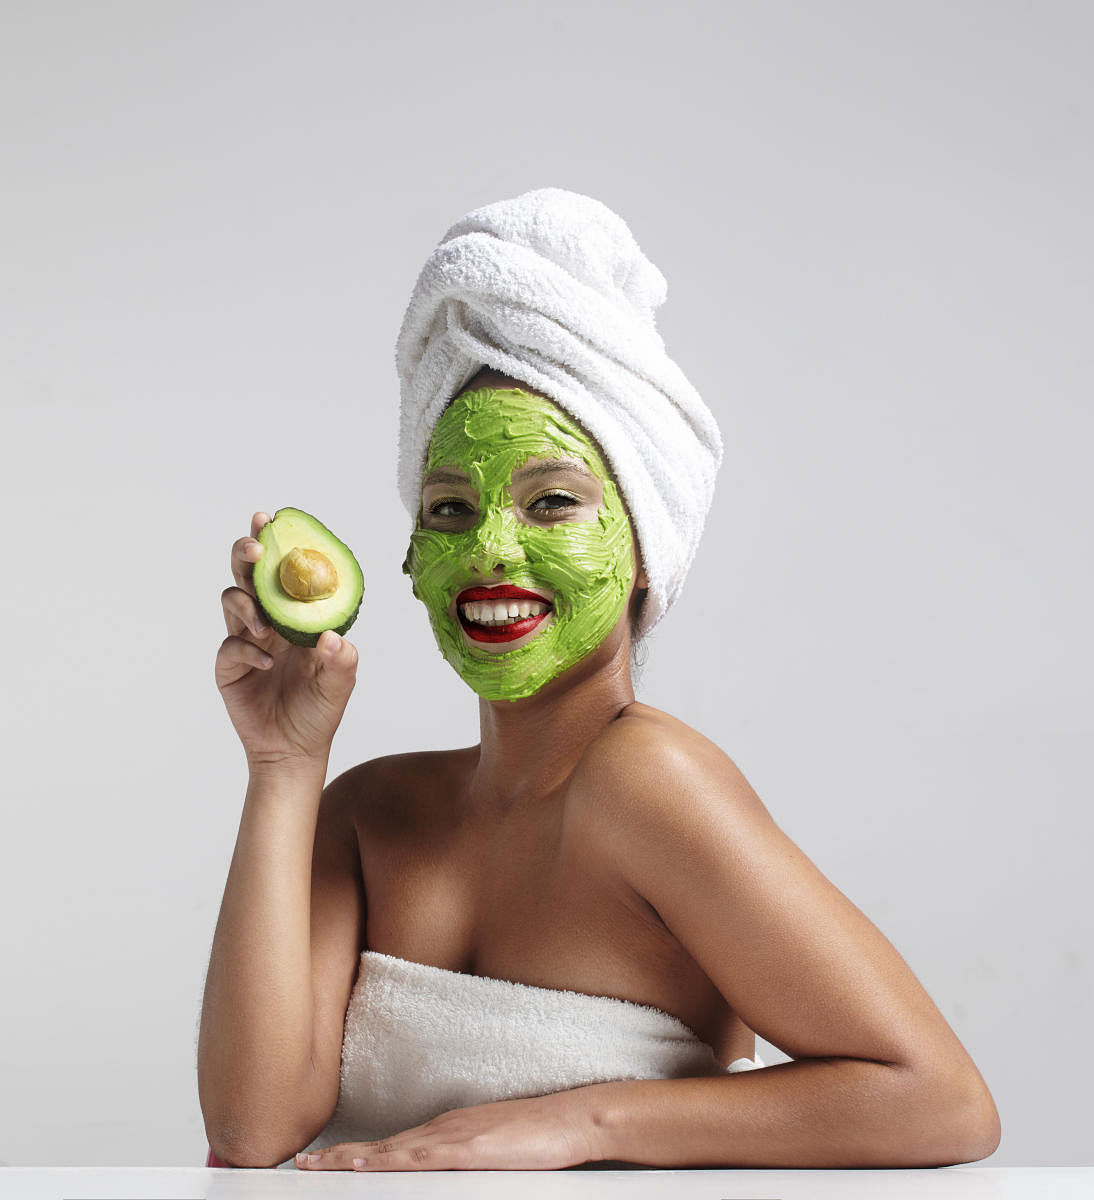 No beauty product will help if you are not healthy from the inside. Take care of your body.